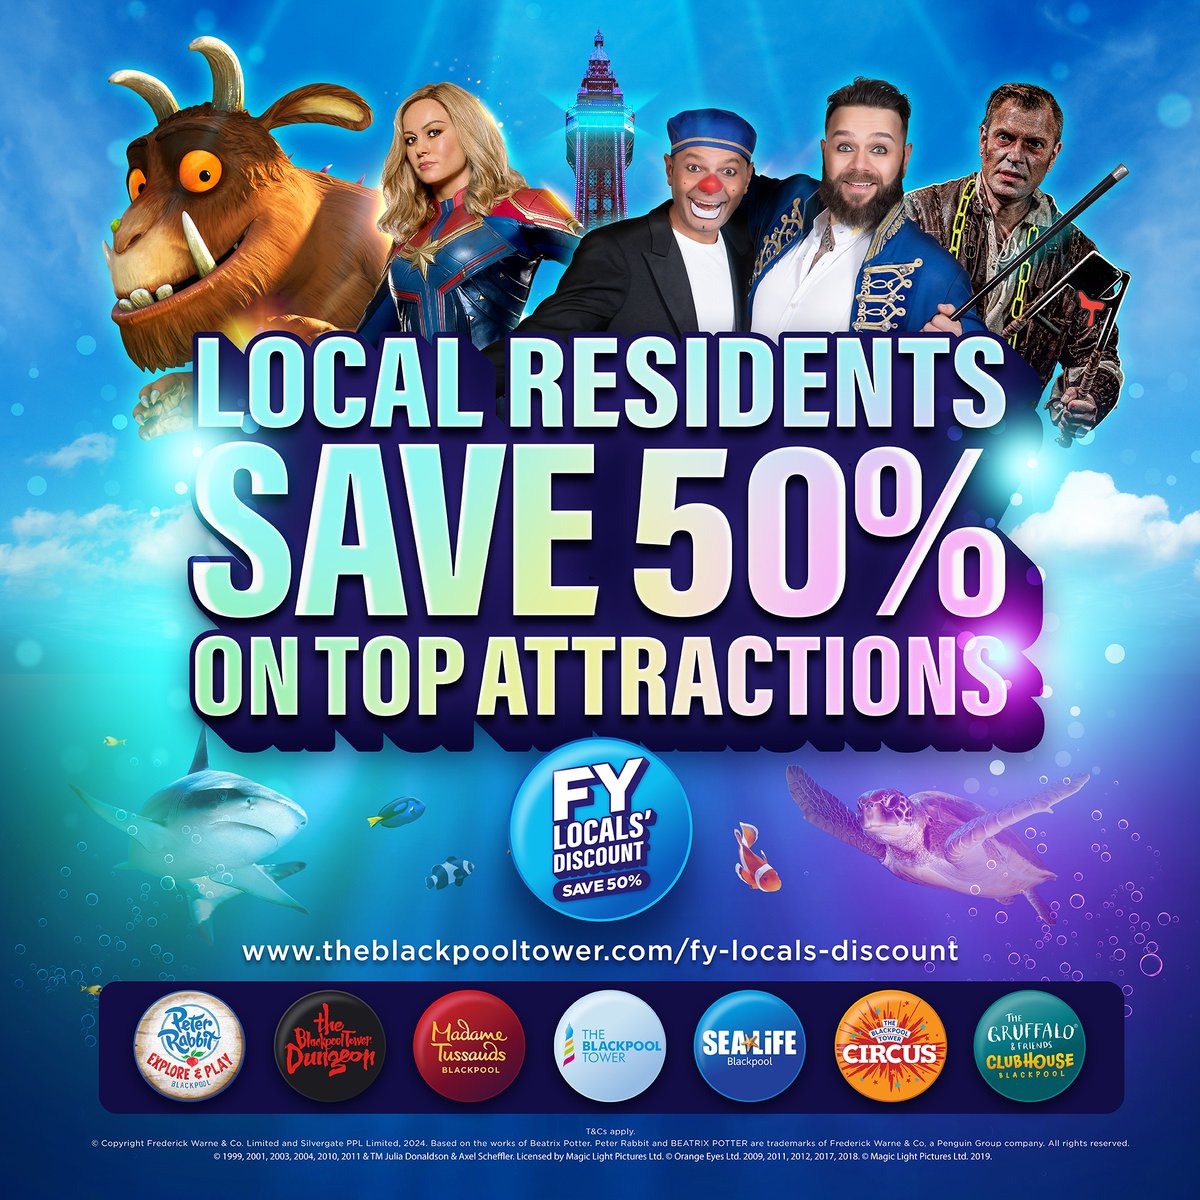 😁HAVE YOU SEEN THIS!👉 If you've got a local/FY5 postcode you can get a whopping 50% off Merlin attractions this year! Book for all your favourites - which ones will you visit? 👀All the special booking links here👉bit.ly/merl-pas